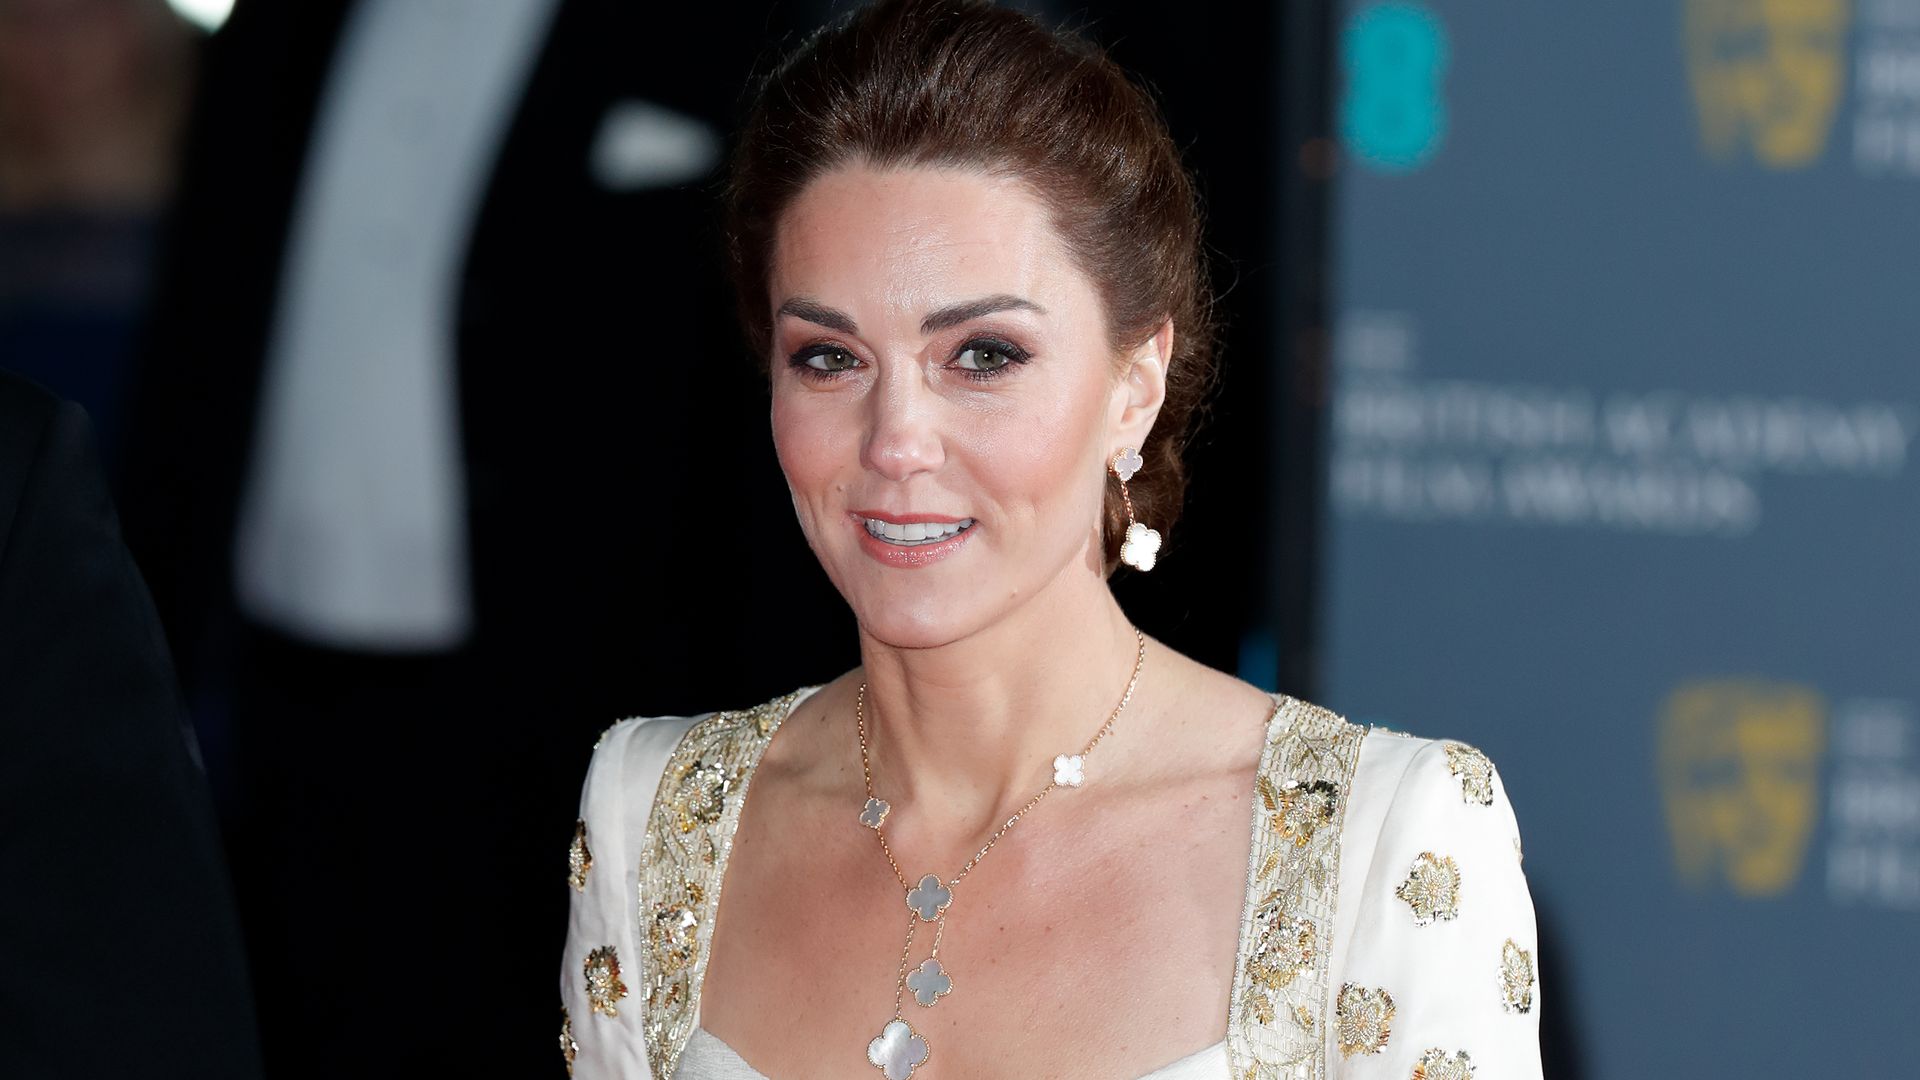 Luck of the Irish: The fascinating history of Princess Kate's favourite 'clover' necklace